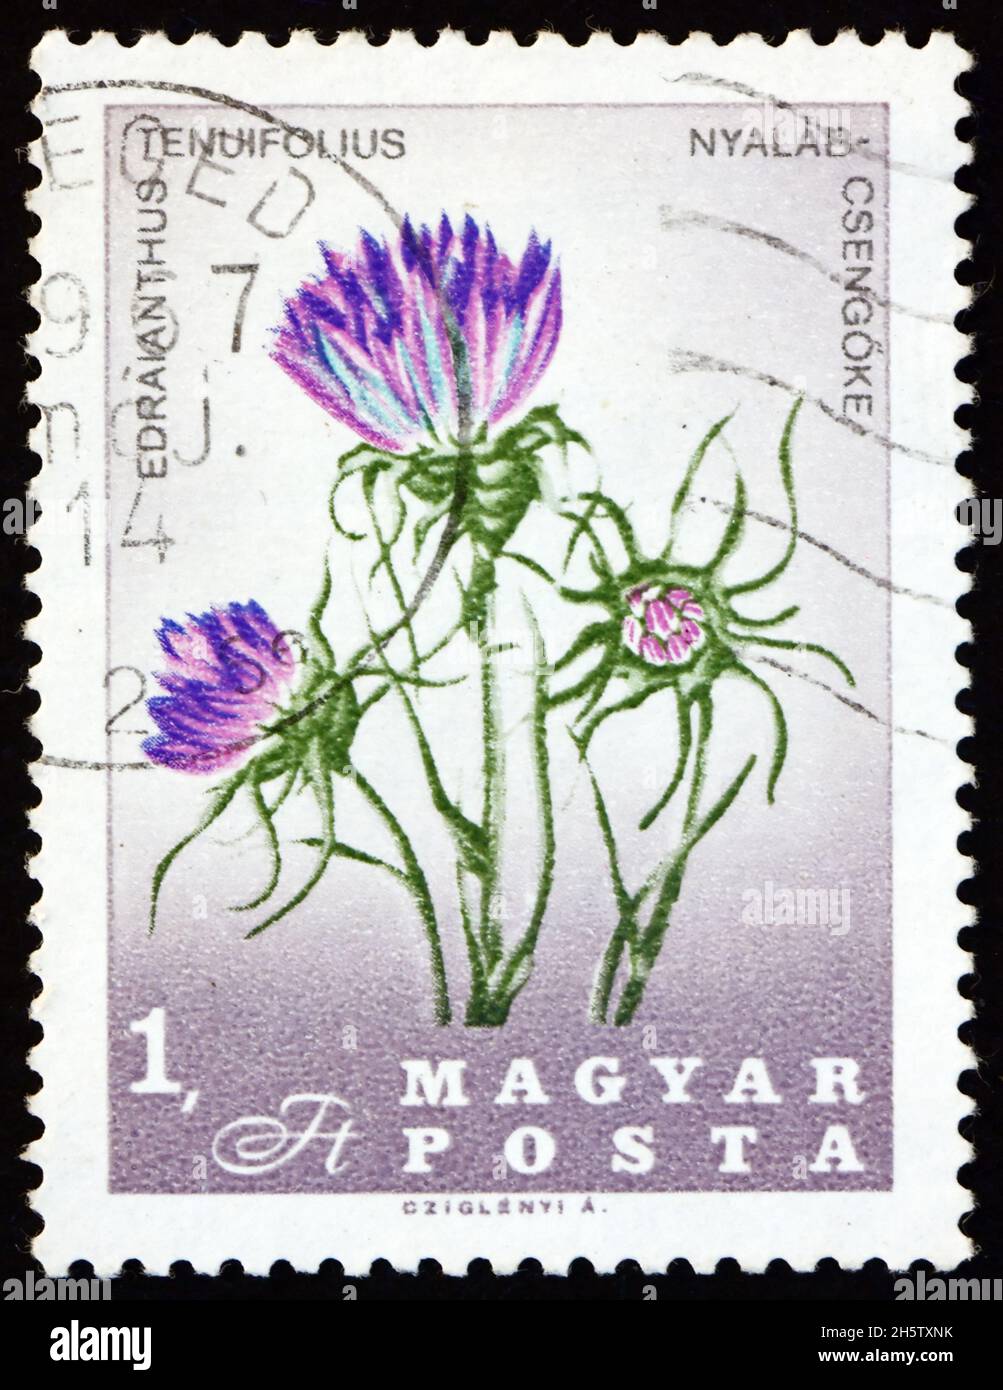 HUNGARY - CIRCA 1967: a stamp printed in Hungary shows rock bells, edraianthus tenuifolius, flowering plants native to mountain regions of the Balkan, Stock Photo